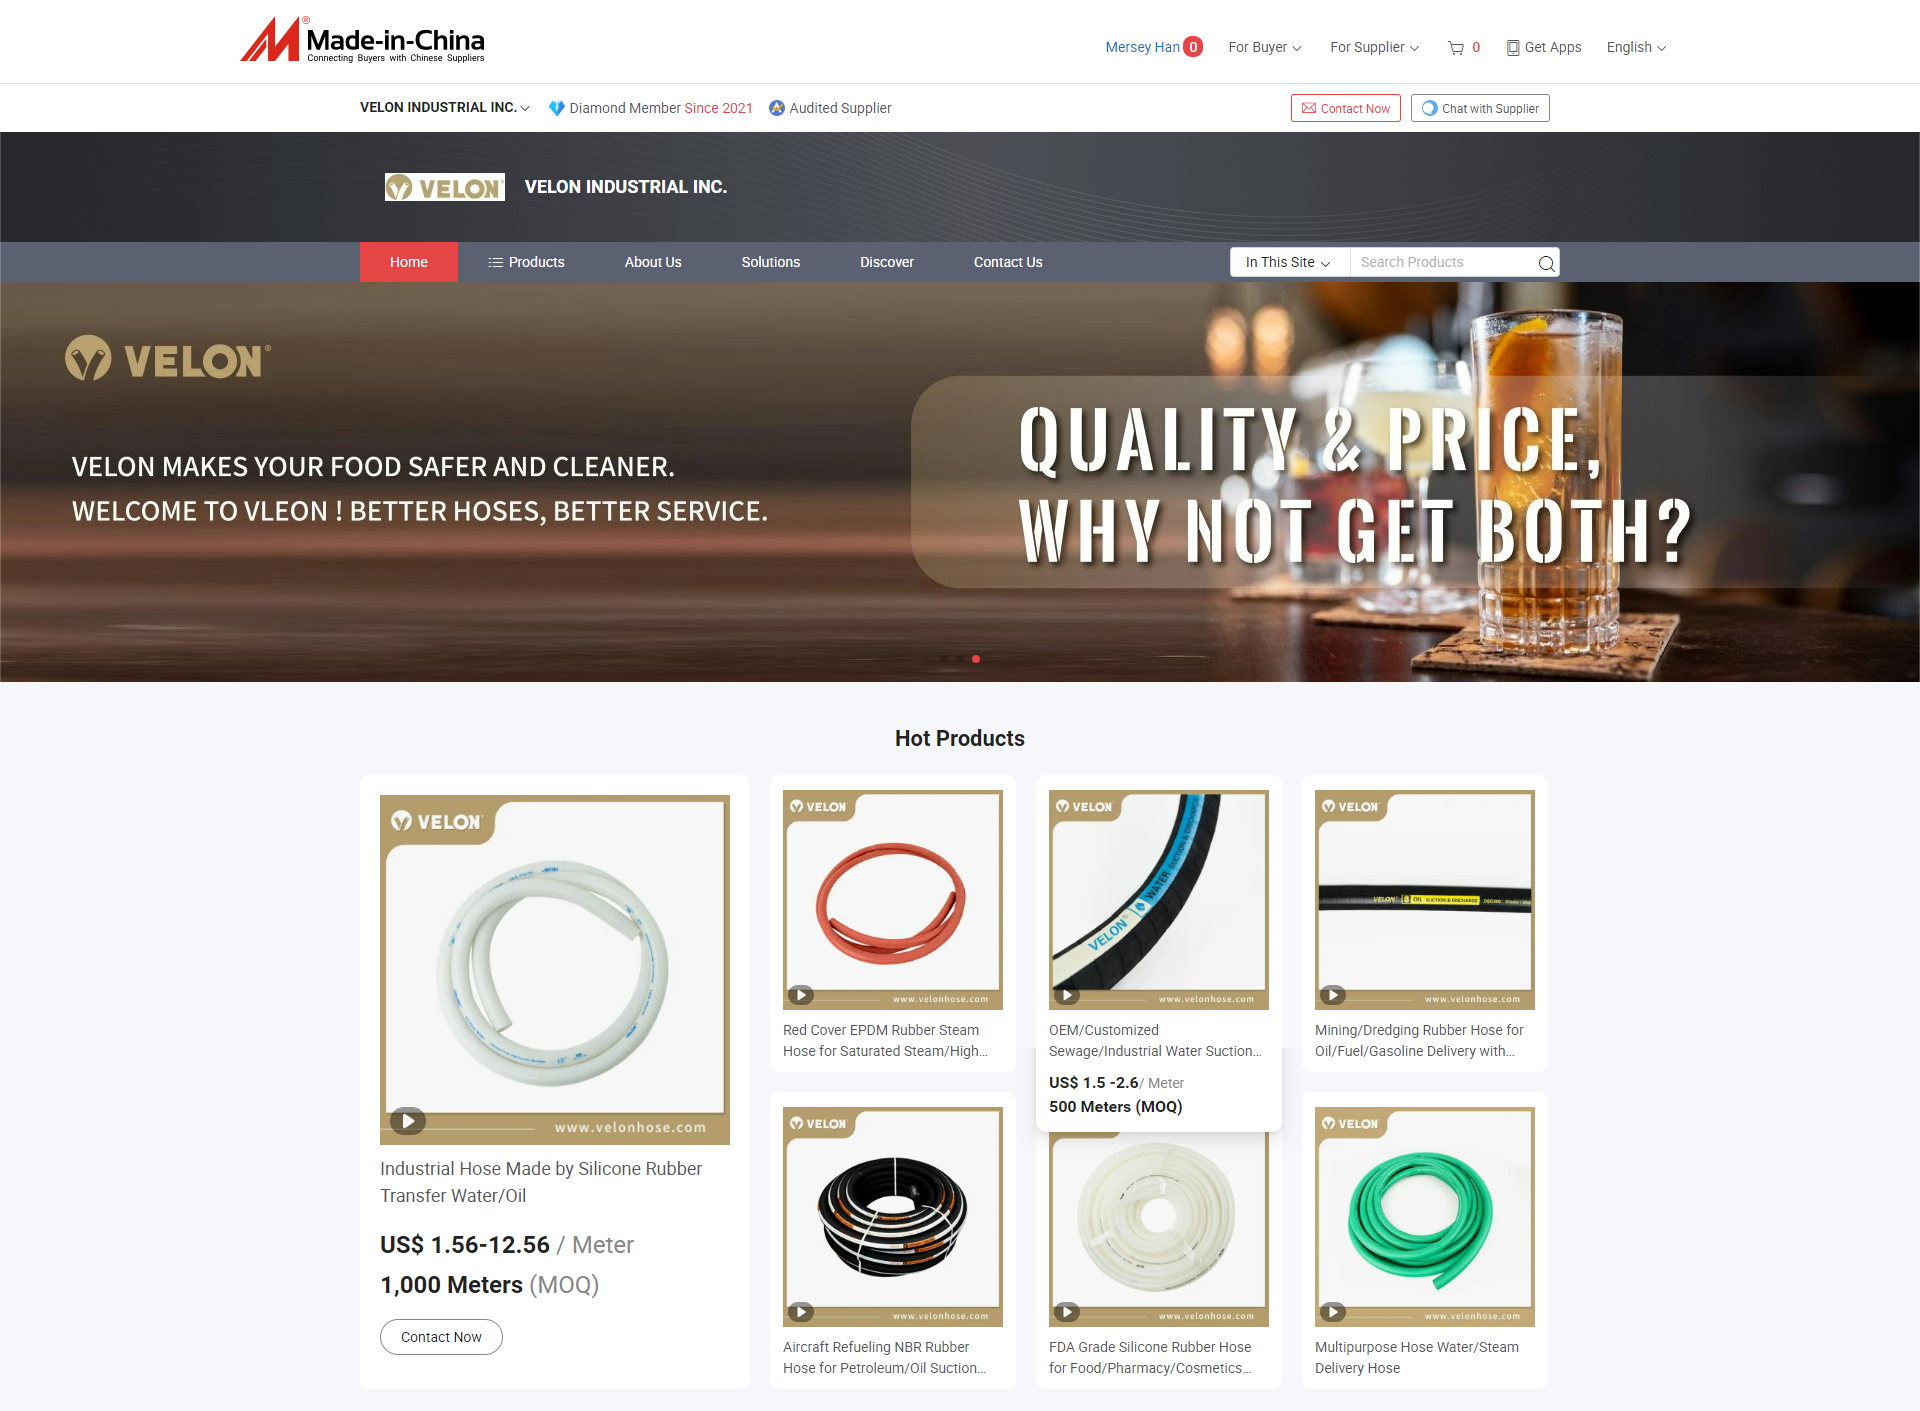 THE NEW HOMEPAGE OF VELONHOSE ON MADE-IN-CHINA.COM HAS ARRIVED!